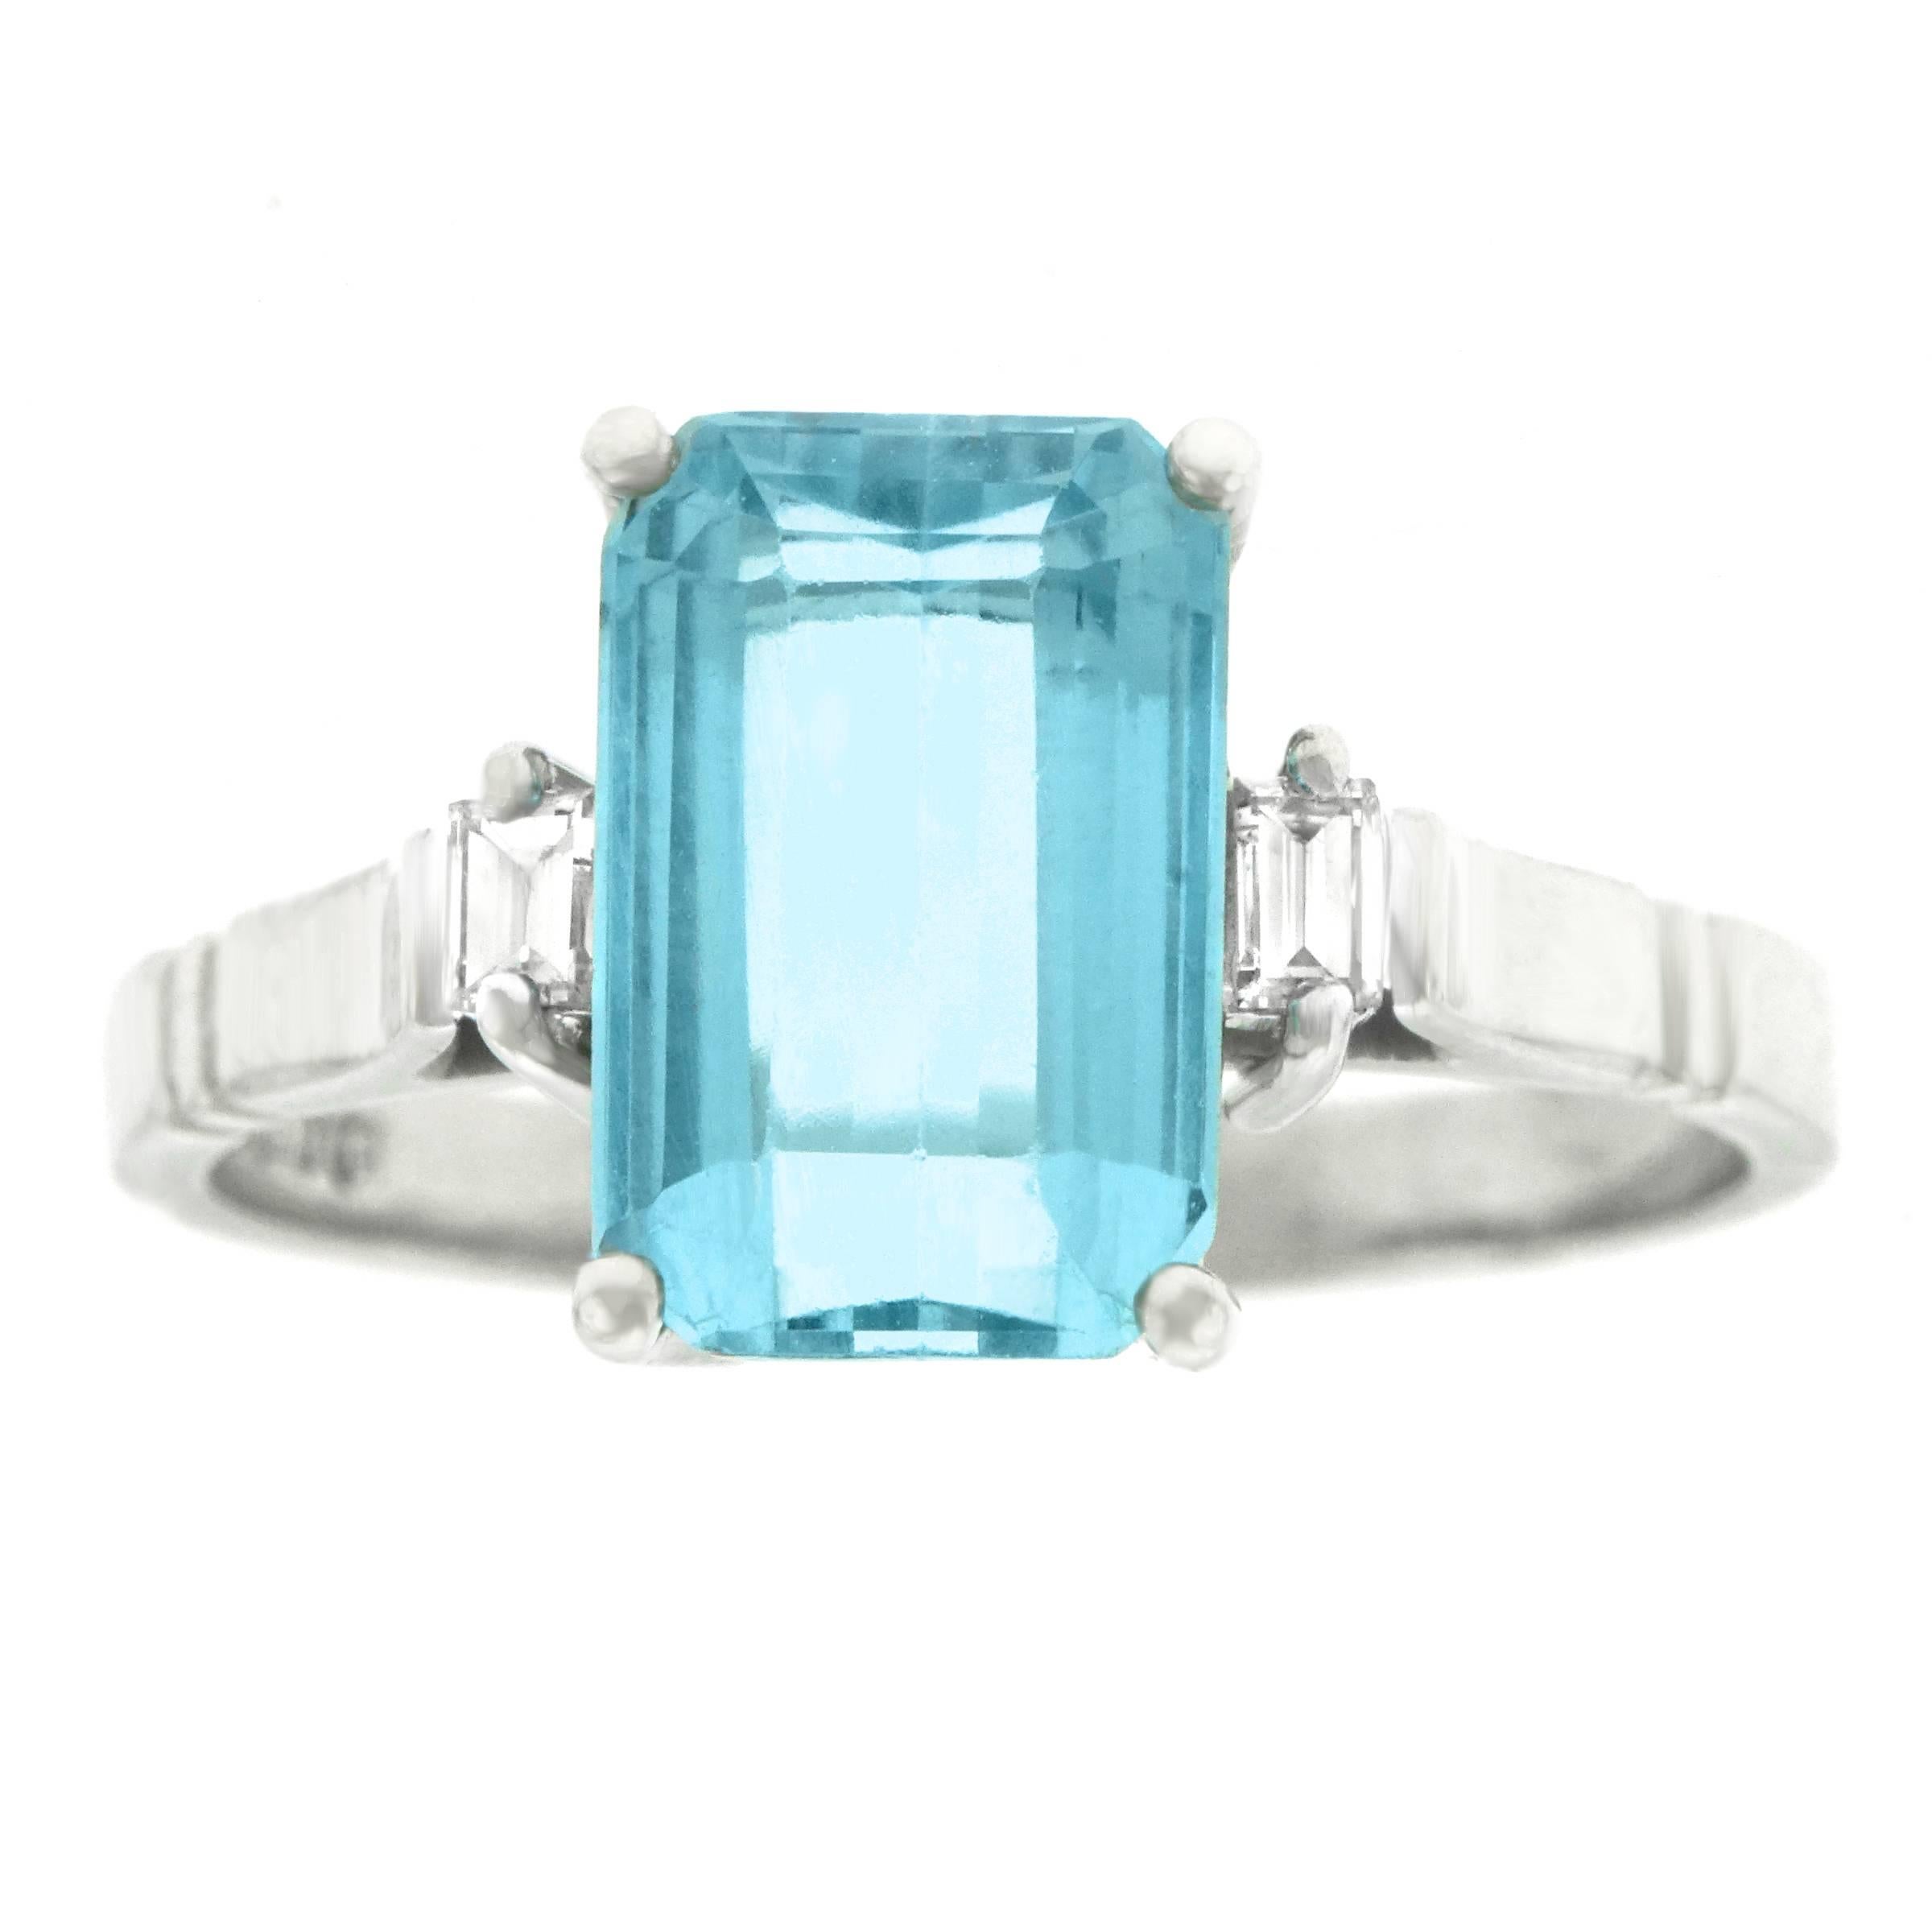 Circa 1976, 18k, London, England.  This colorful eighties ring is set with a 2.50 carat aquamarine framed by two superb diamonds (F color, VS clarity). Its refined modernist architecture gives it a sleek, sophisticated look. Meticulously fabricated